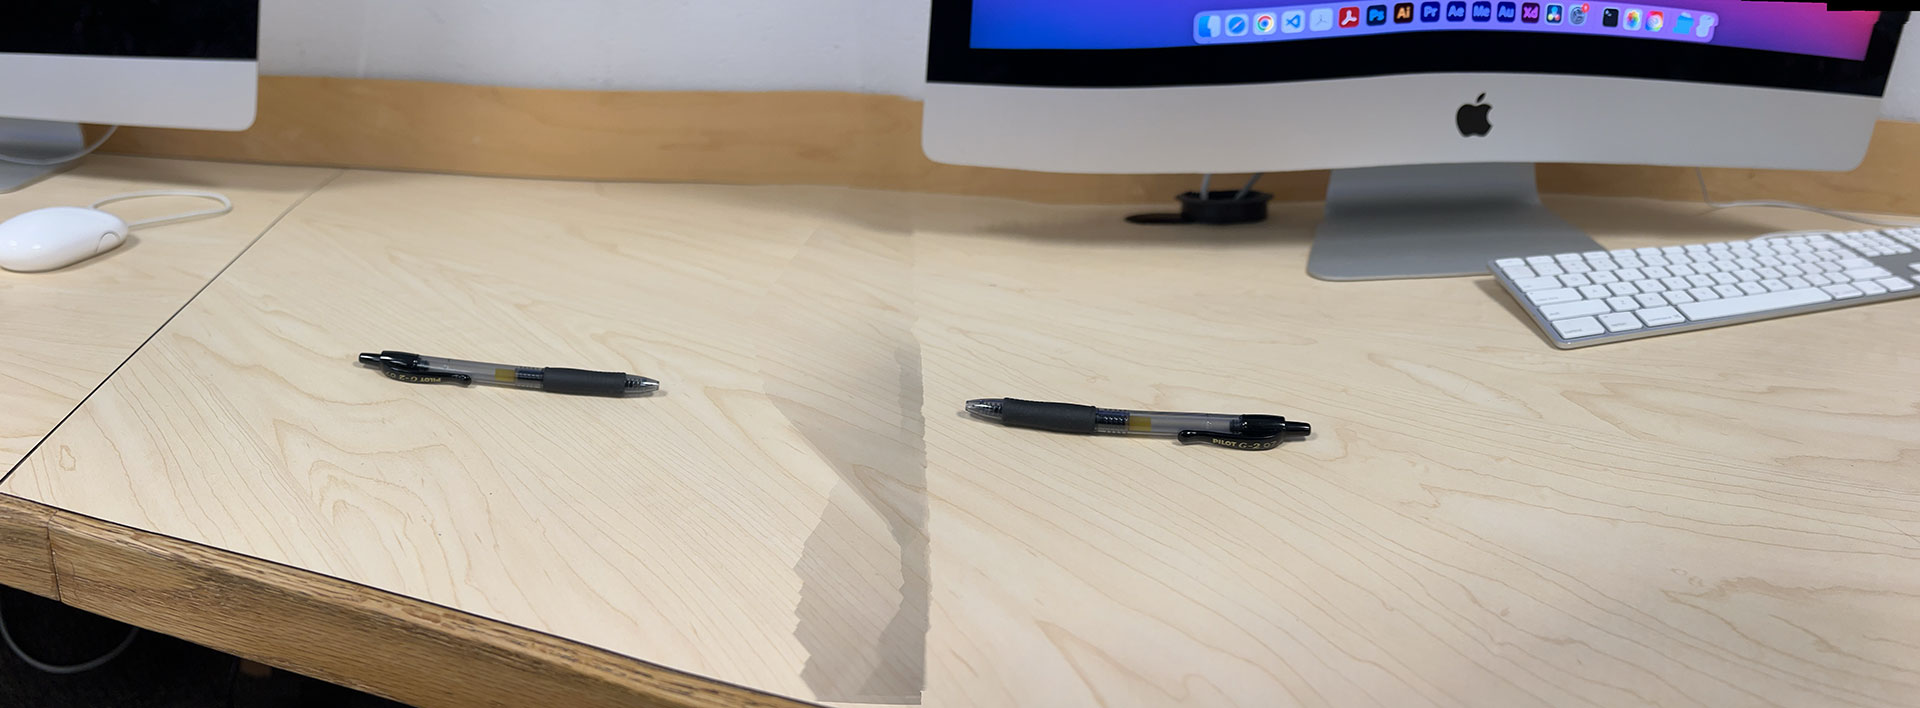 Panorama attempt of a pen on a desk